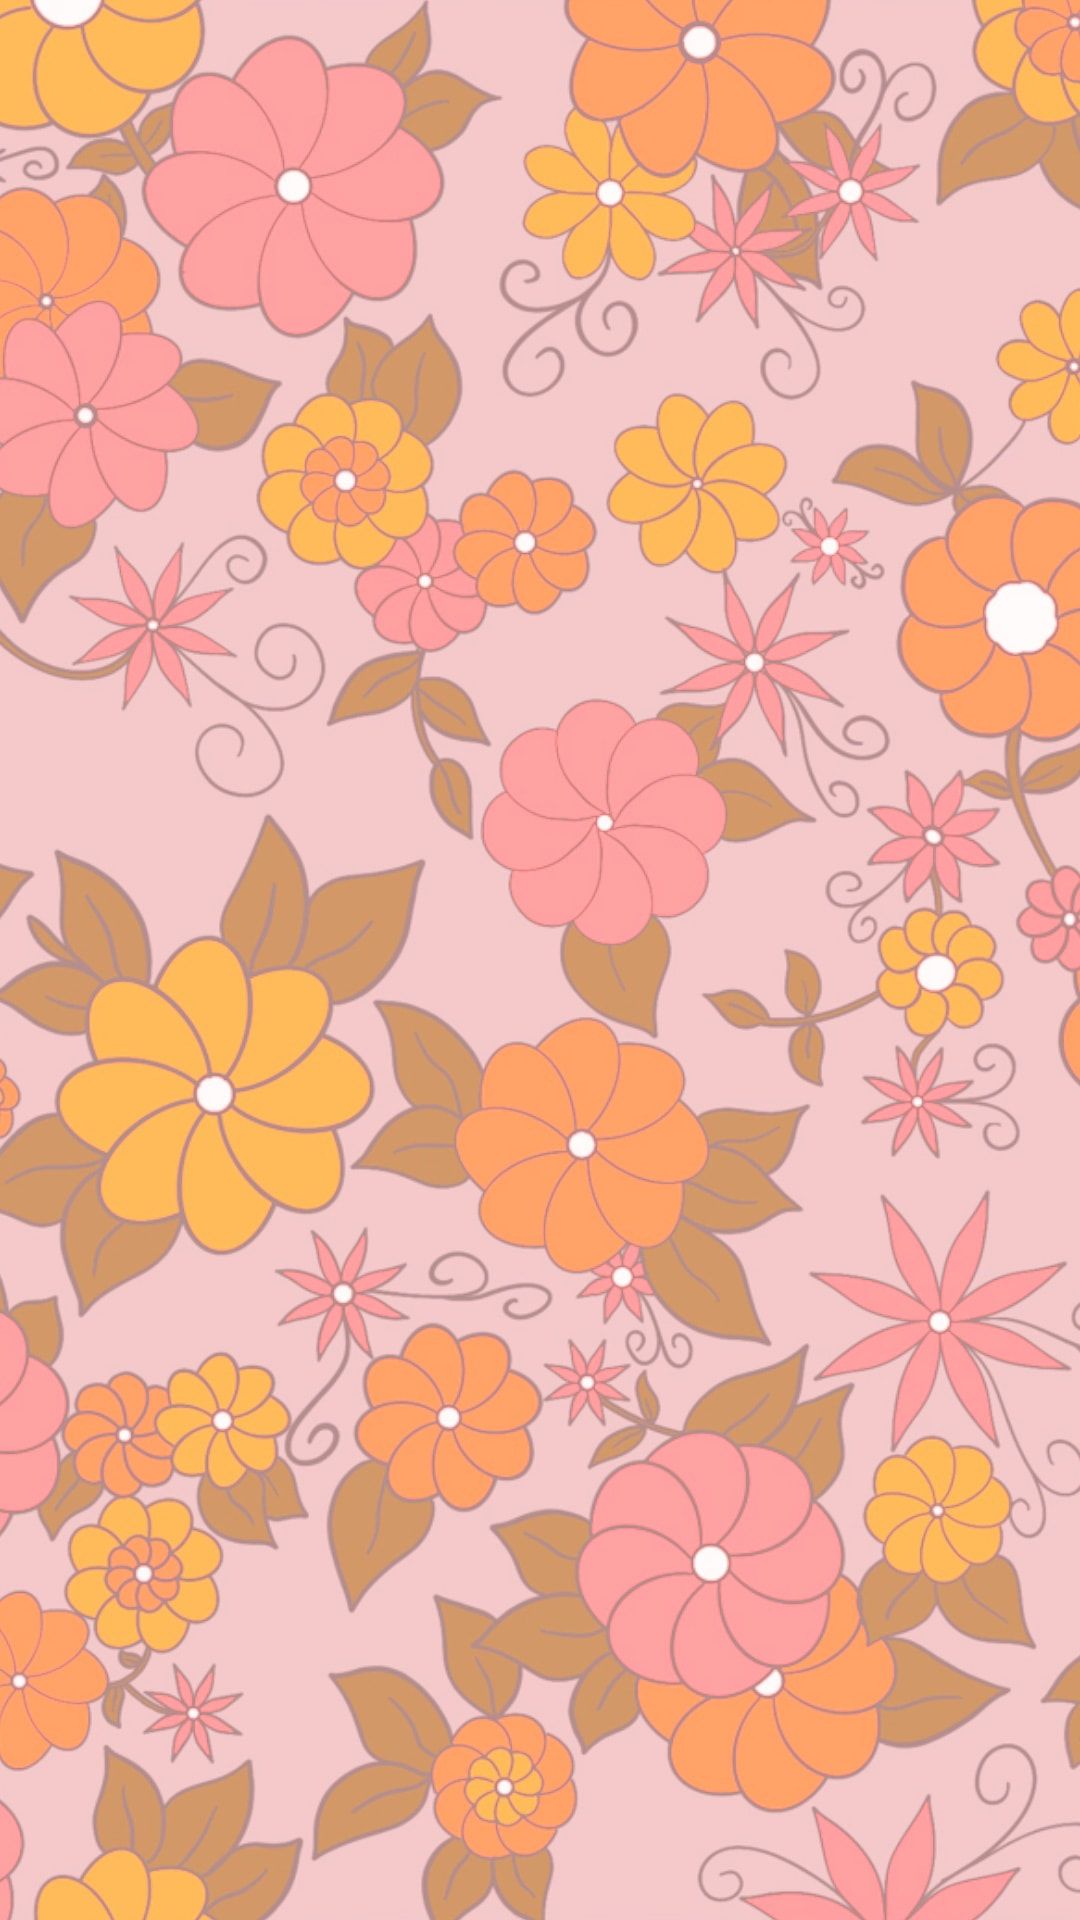 A pink and orange floral pattern - 60s